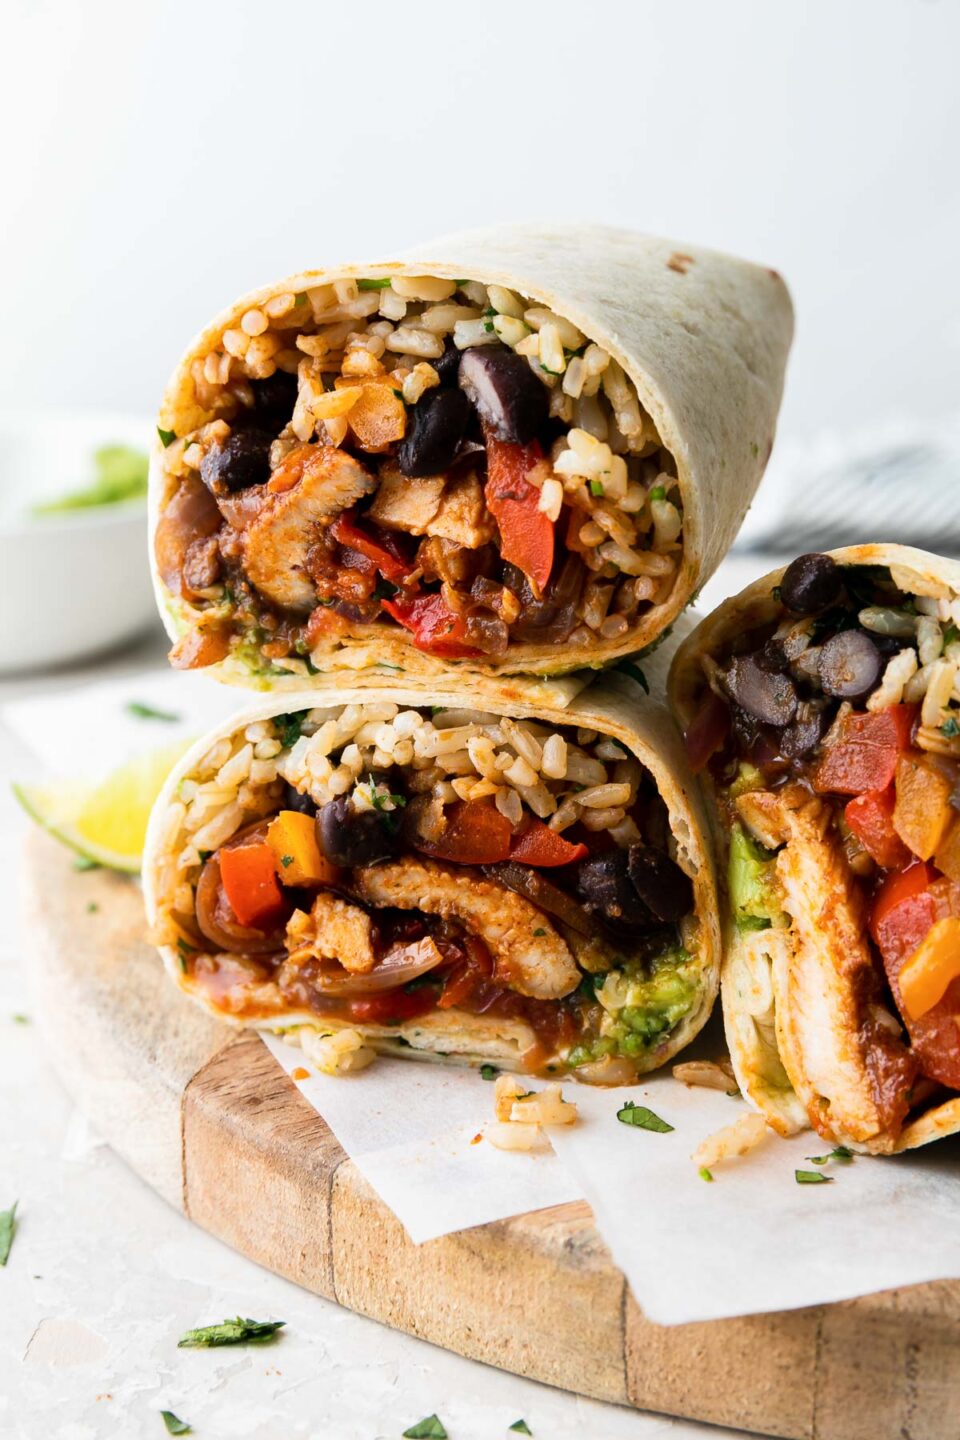 A side angle shot of three stacked burritos stuffed with baked fajita chicken, rice, peppers, black beans and guacamole on parchment paper on a wooden tray atop a white surface.